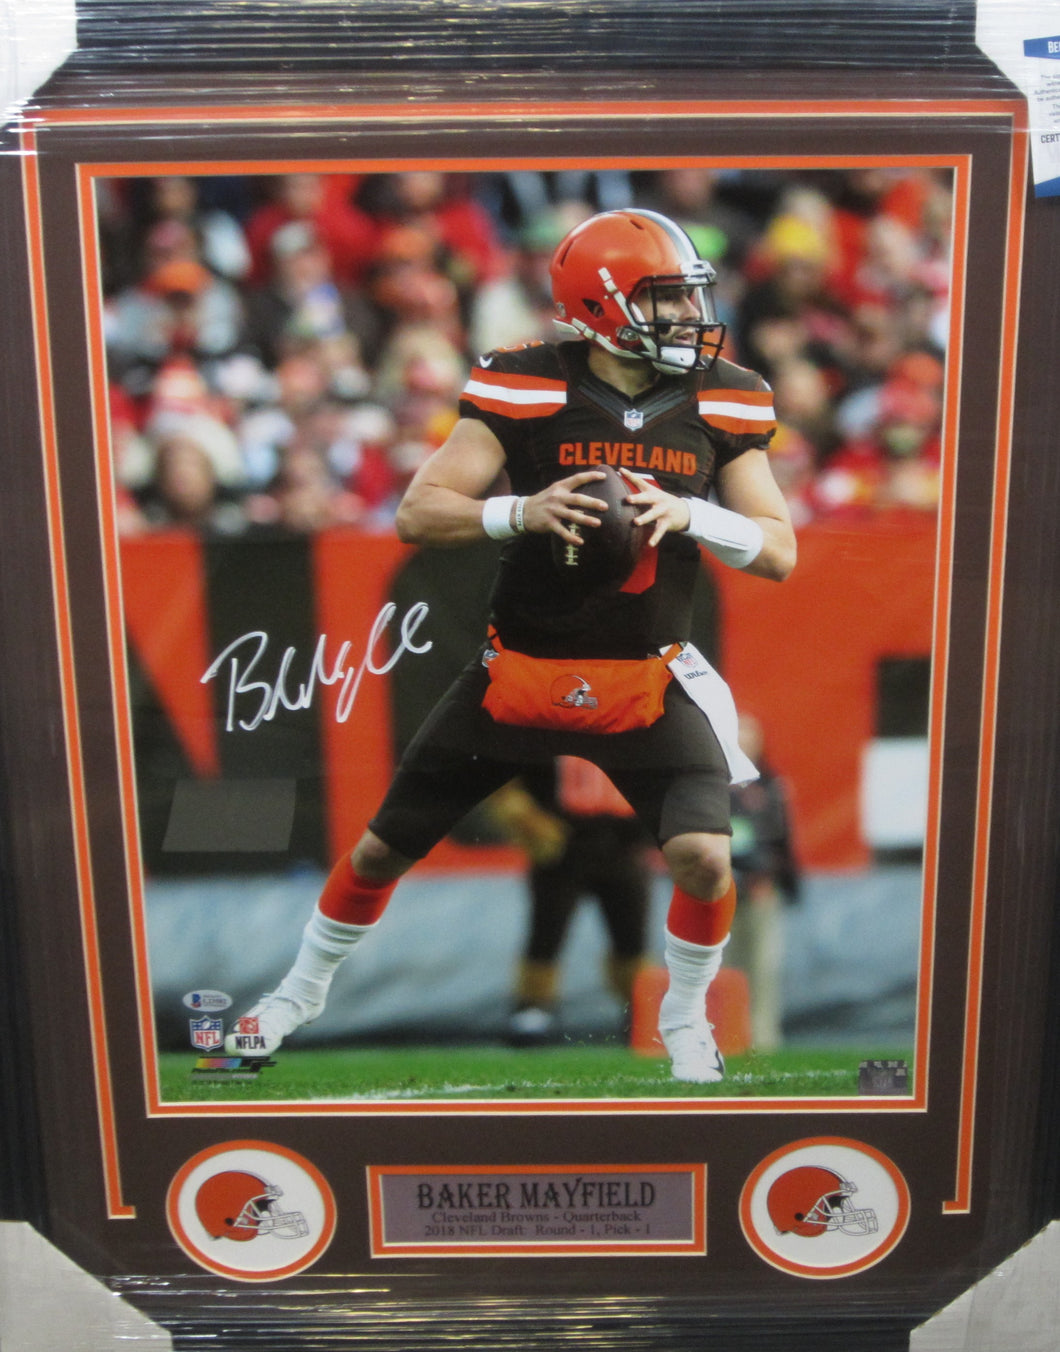 Cleveland Browns Baker Mayfield SIGNED Framed Matted 16x20 Photo With BECKETT COA